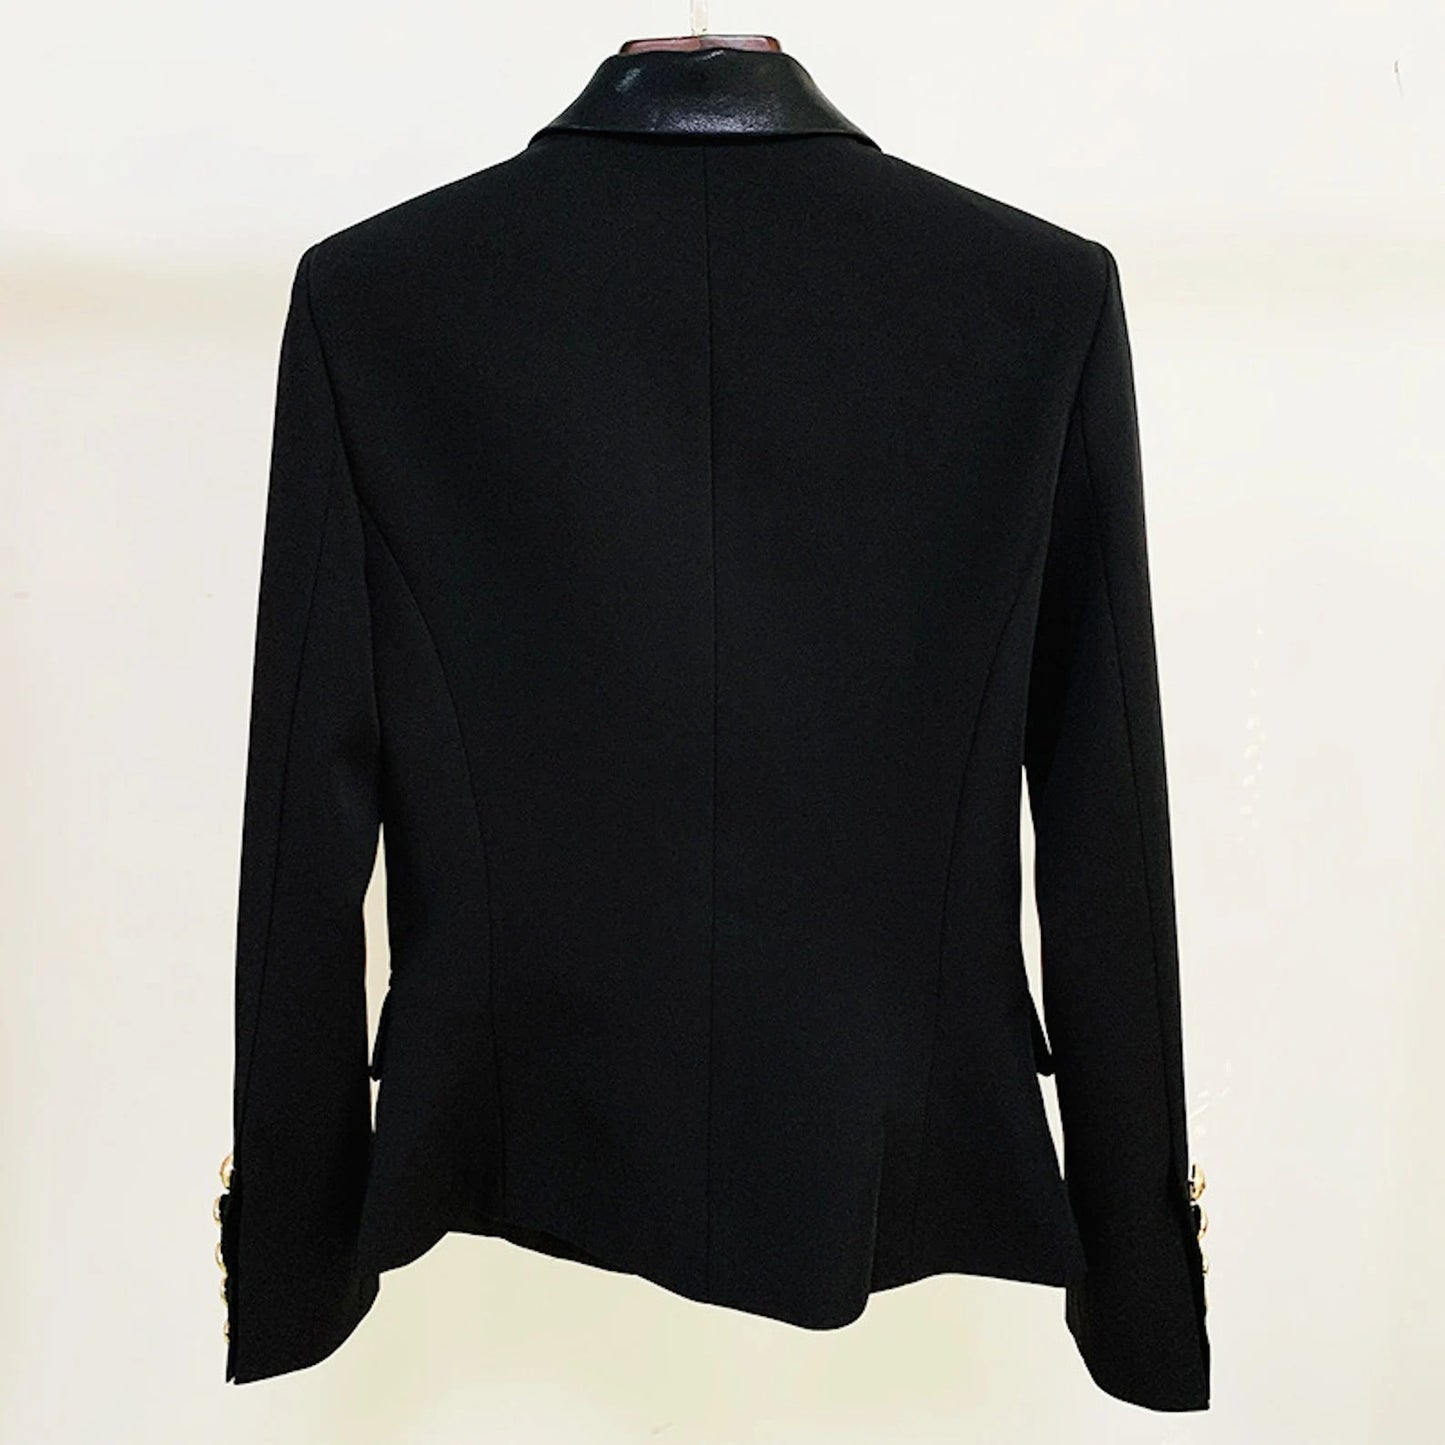 Women's Luxury Faux Leather Collar Blazer Golden Lion Buttons Black Quick International Service!  Women's Luxury Faux Leather Collar Blazer Golden Lion Buttons Black, can wear it for College Inaugurations, Ceremony and Official use. The comfort of our ladies tailored suits are unsurpassed, as is the confidence it can provide its wearer in knowing that they are looking at their absolute best.